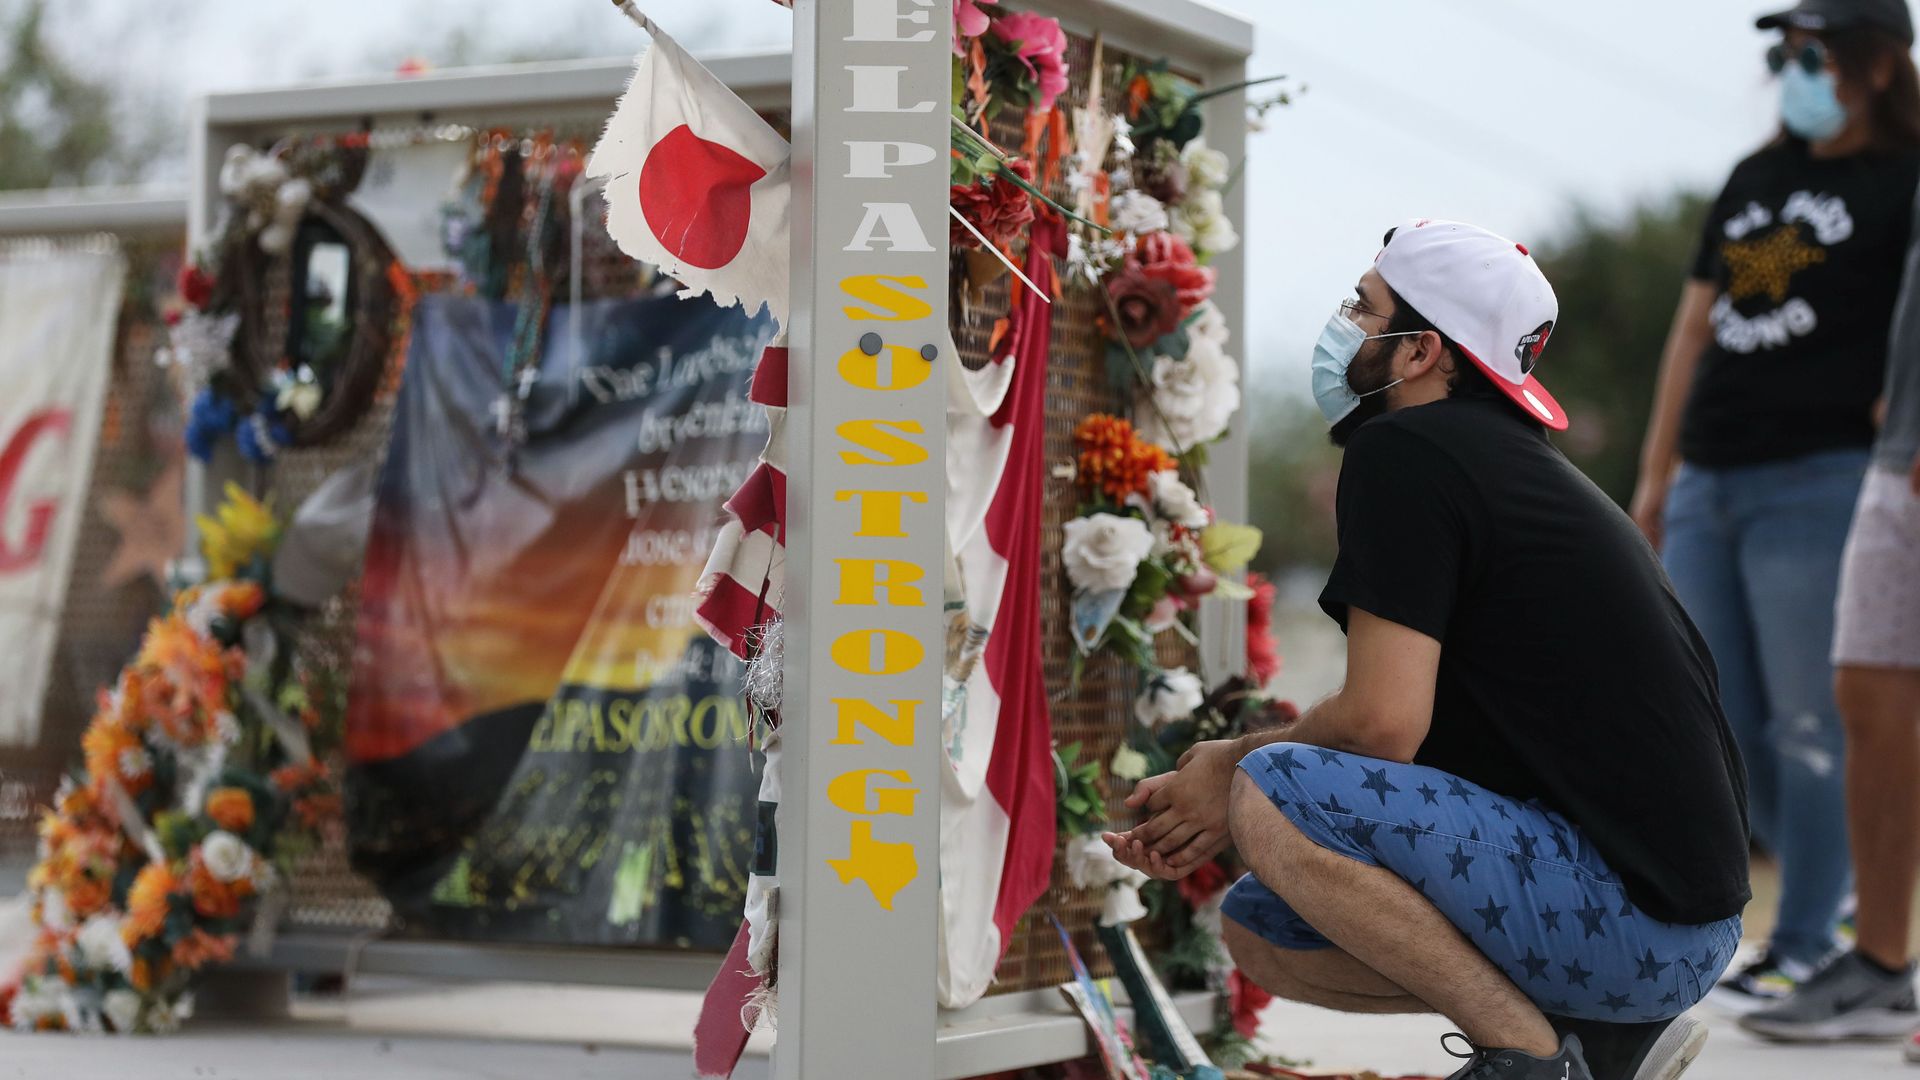 People view a temporary memorial in Ponder Park honoring victims of the Walmart shooting which left 23 people dead in a racist attack targeting Latinos on August 2, 2020 in El Paso, Texas.